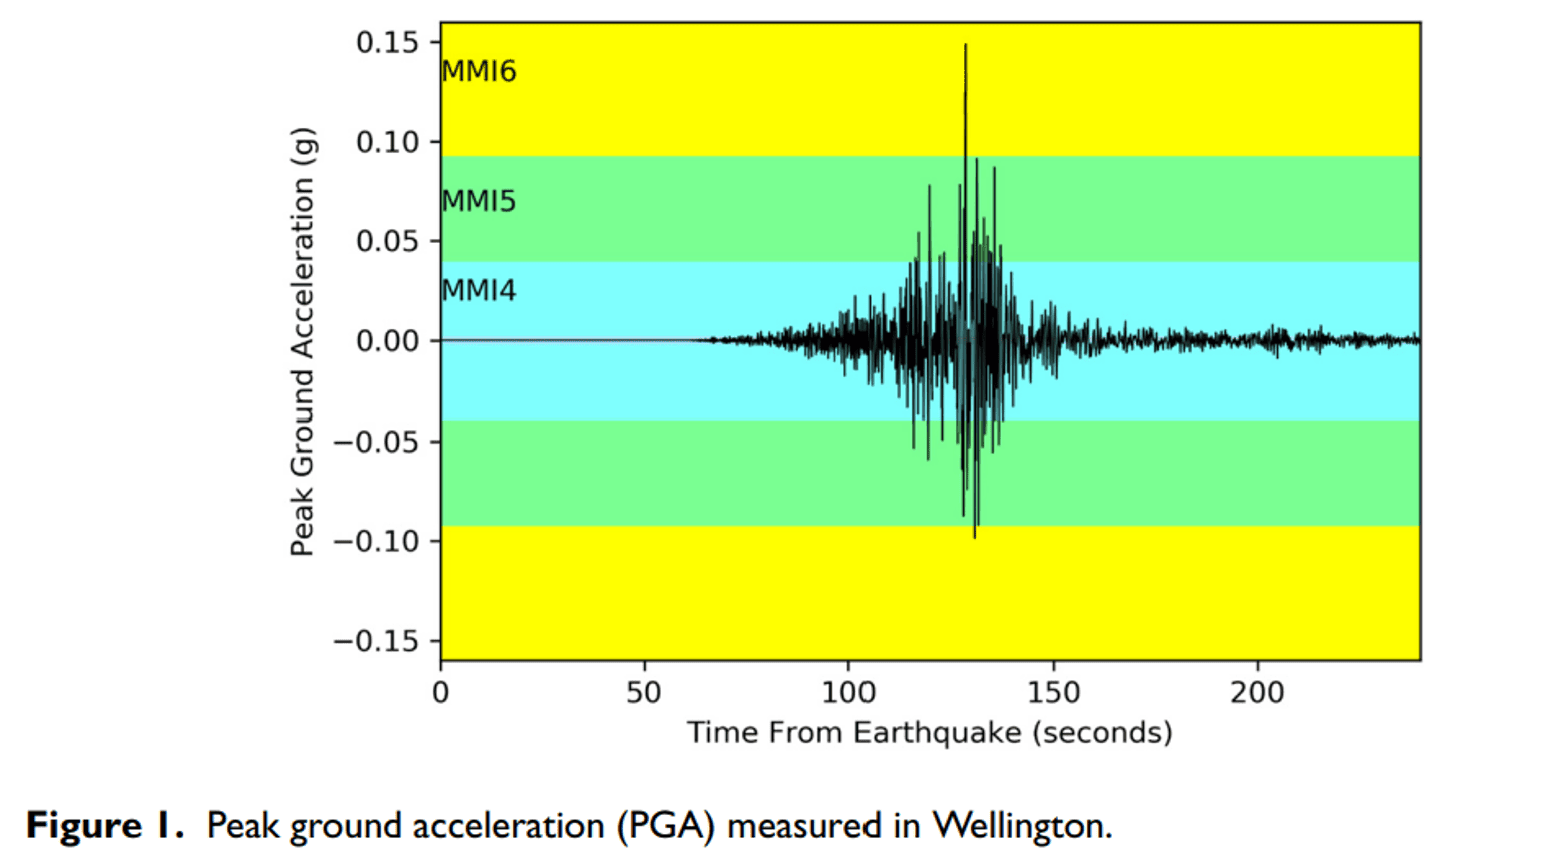 Peak ground acceleration (PGA) measured in Wellington from the Kaikōura Earthquake of 2016. The earthquake was mostly situated within MMI4, but extends into MMI5 and MMI6. 